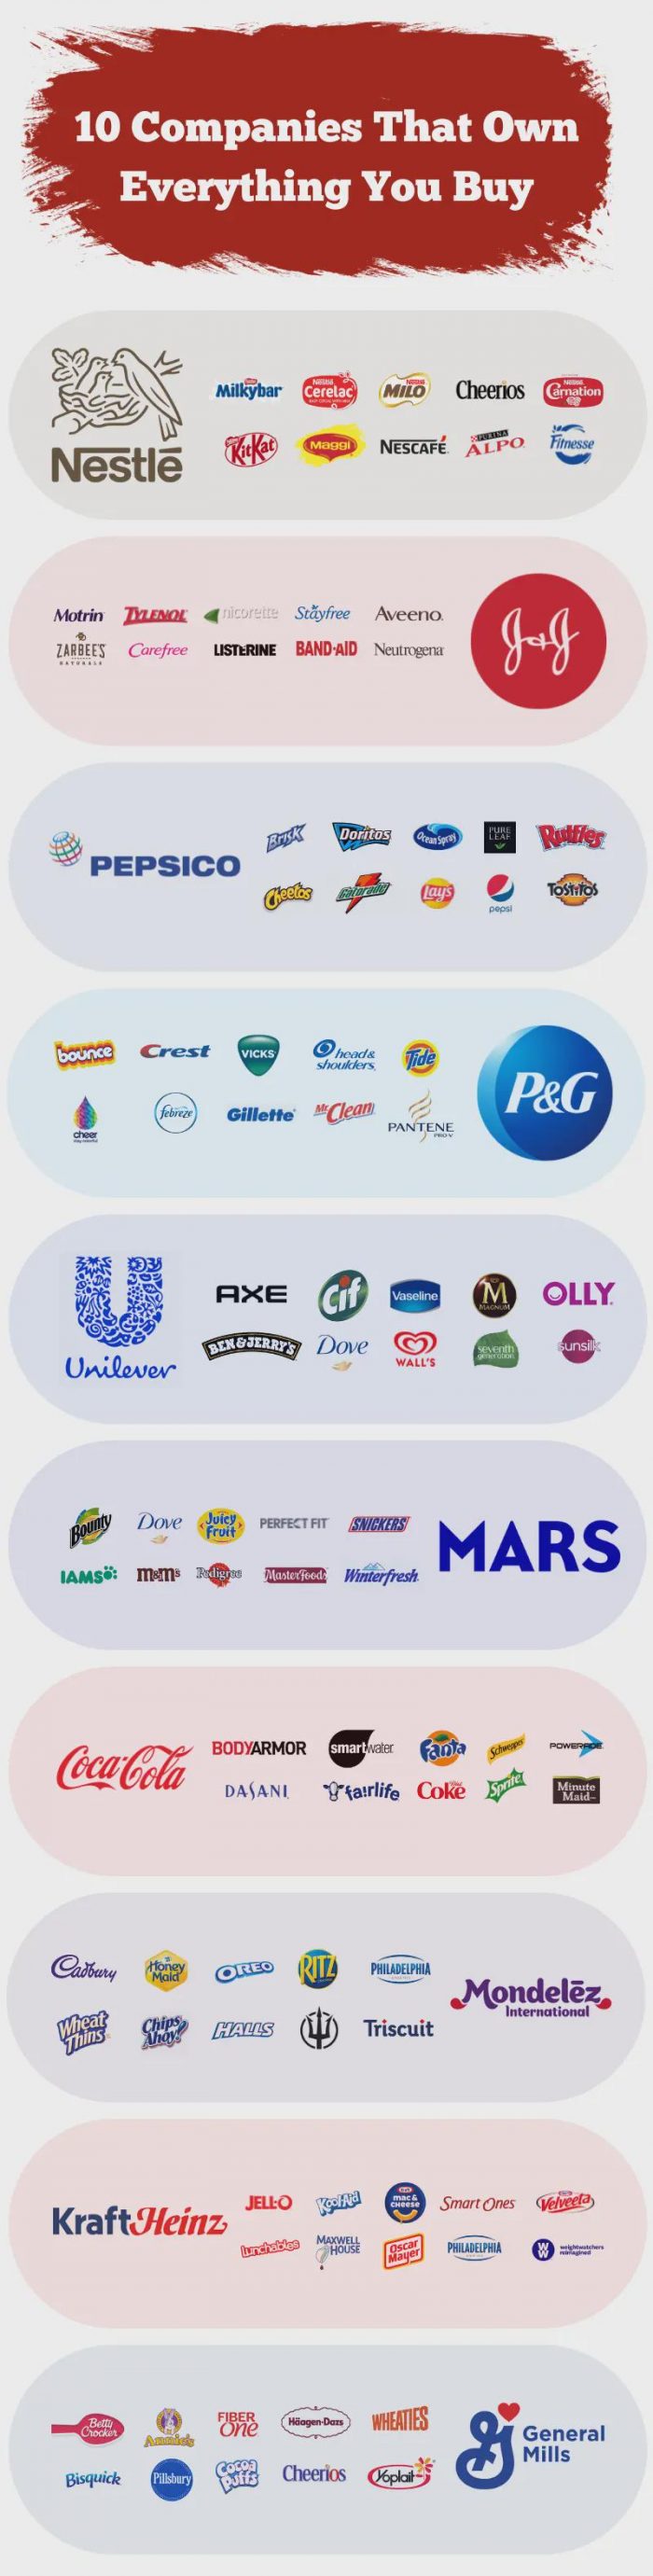 companies that own everything you buy